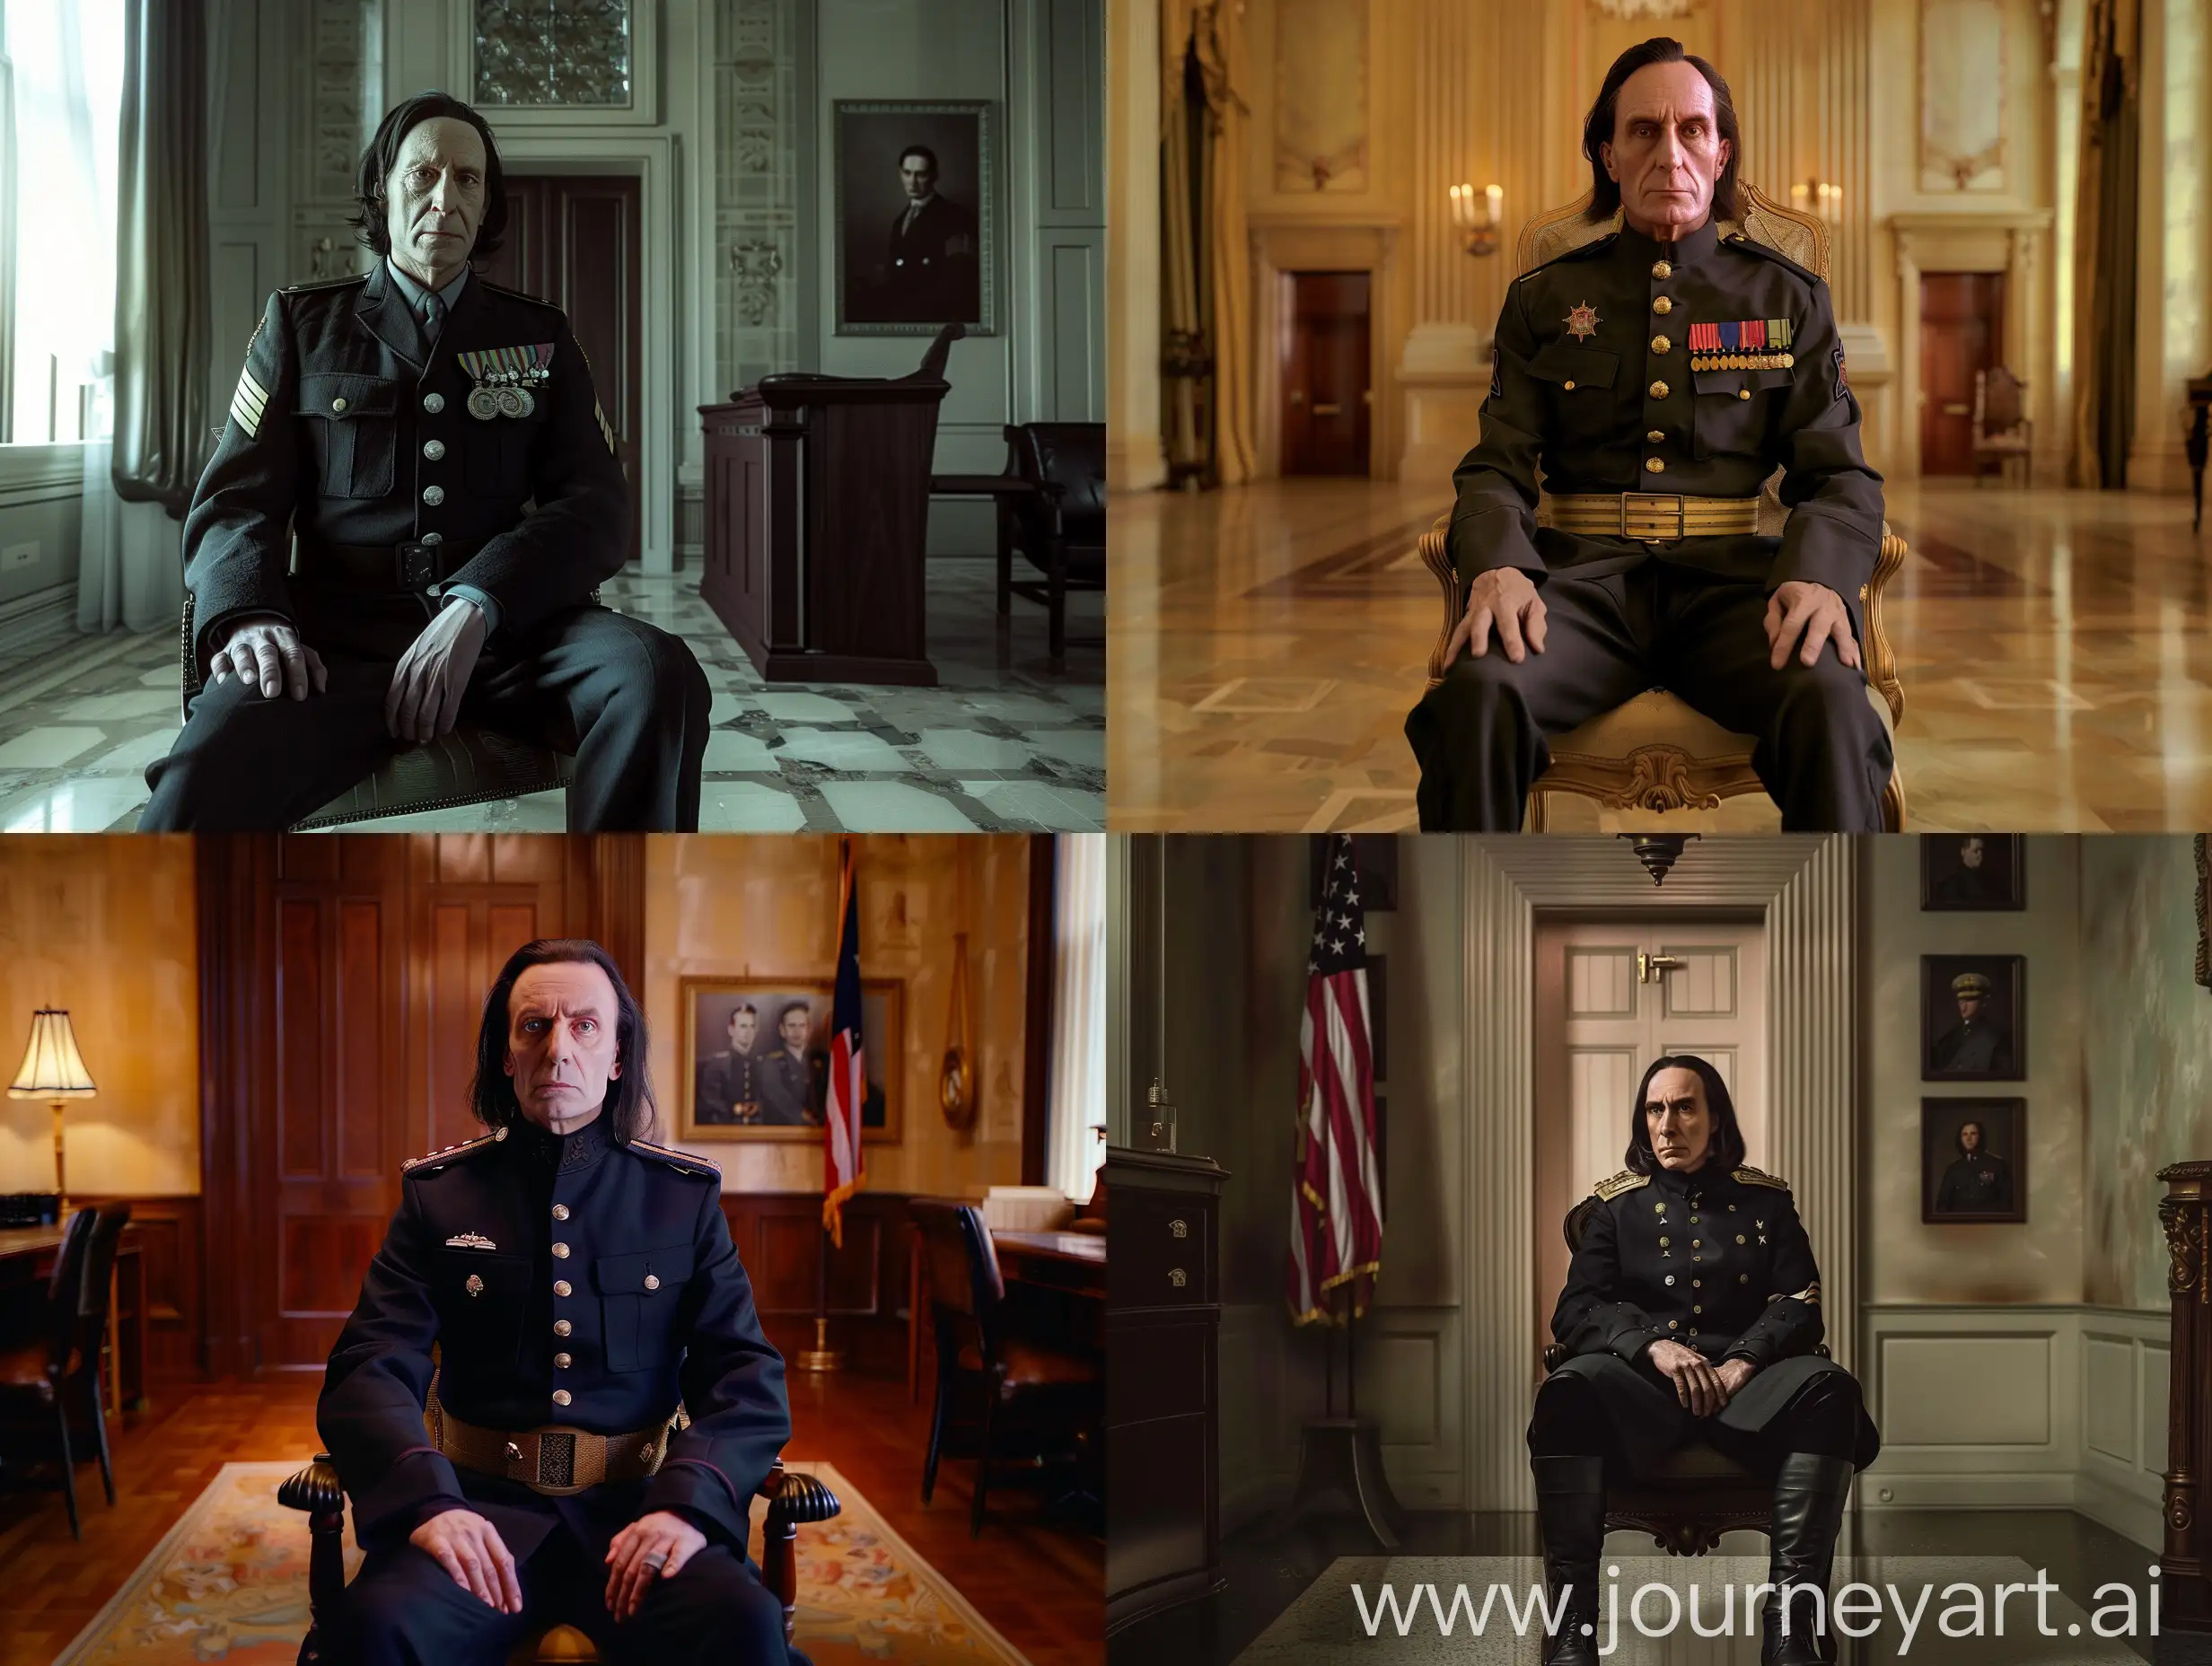 Severus-Snape-in-WW2-American-Military-Officer-Uniform-at-Pentagon